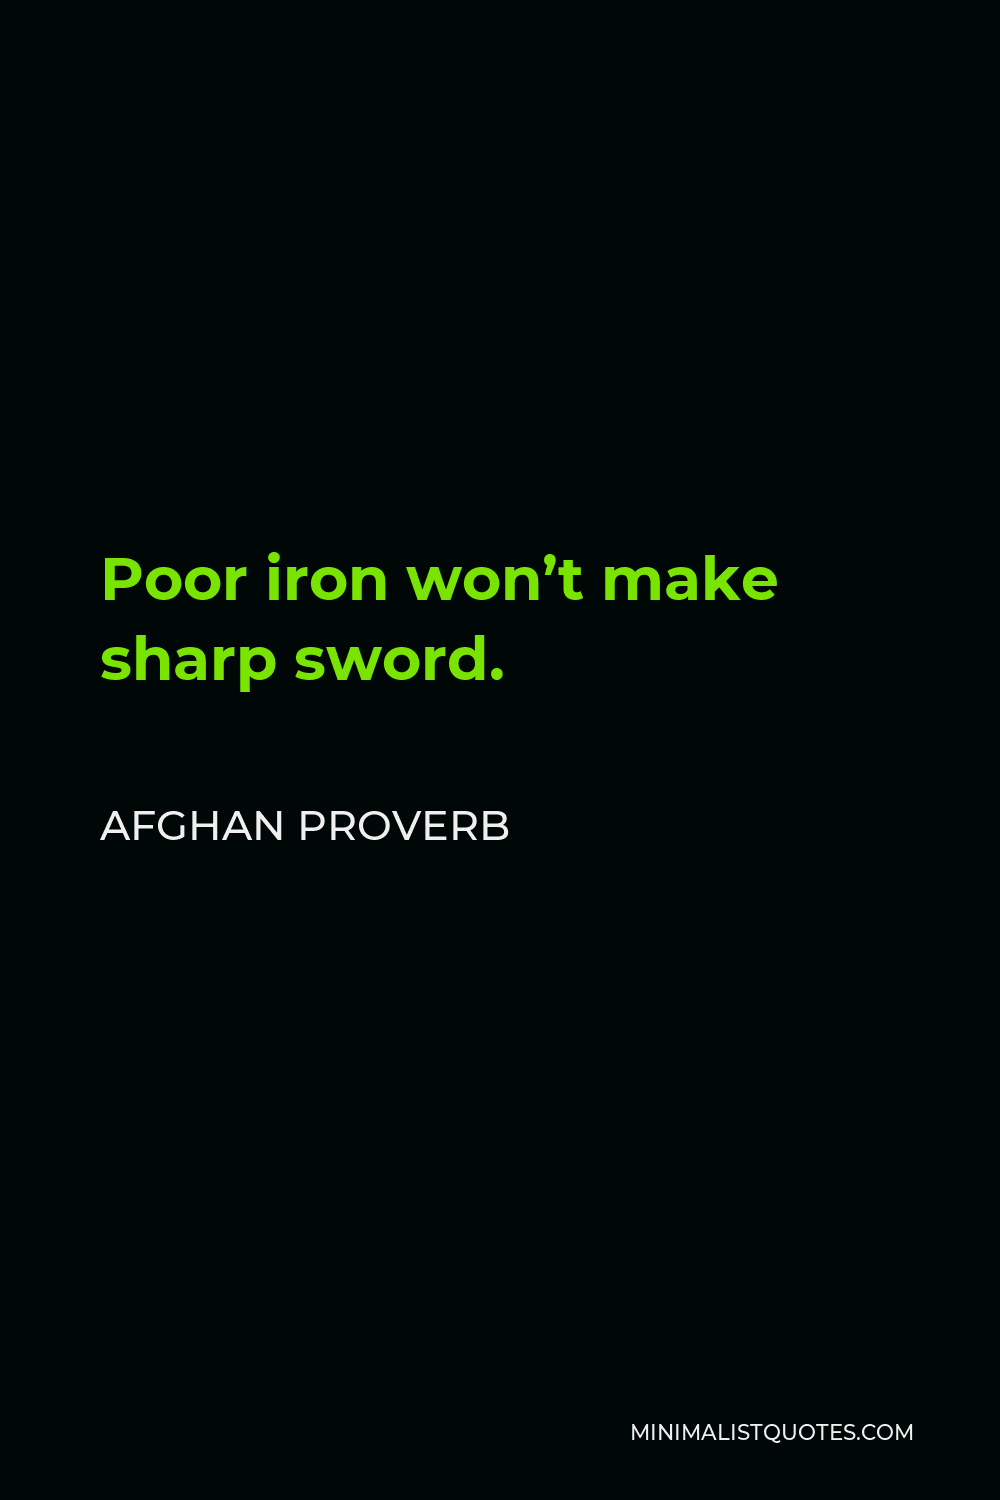 Afghan Proverb Quote - Poor iron won’t make sharp sword.